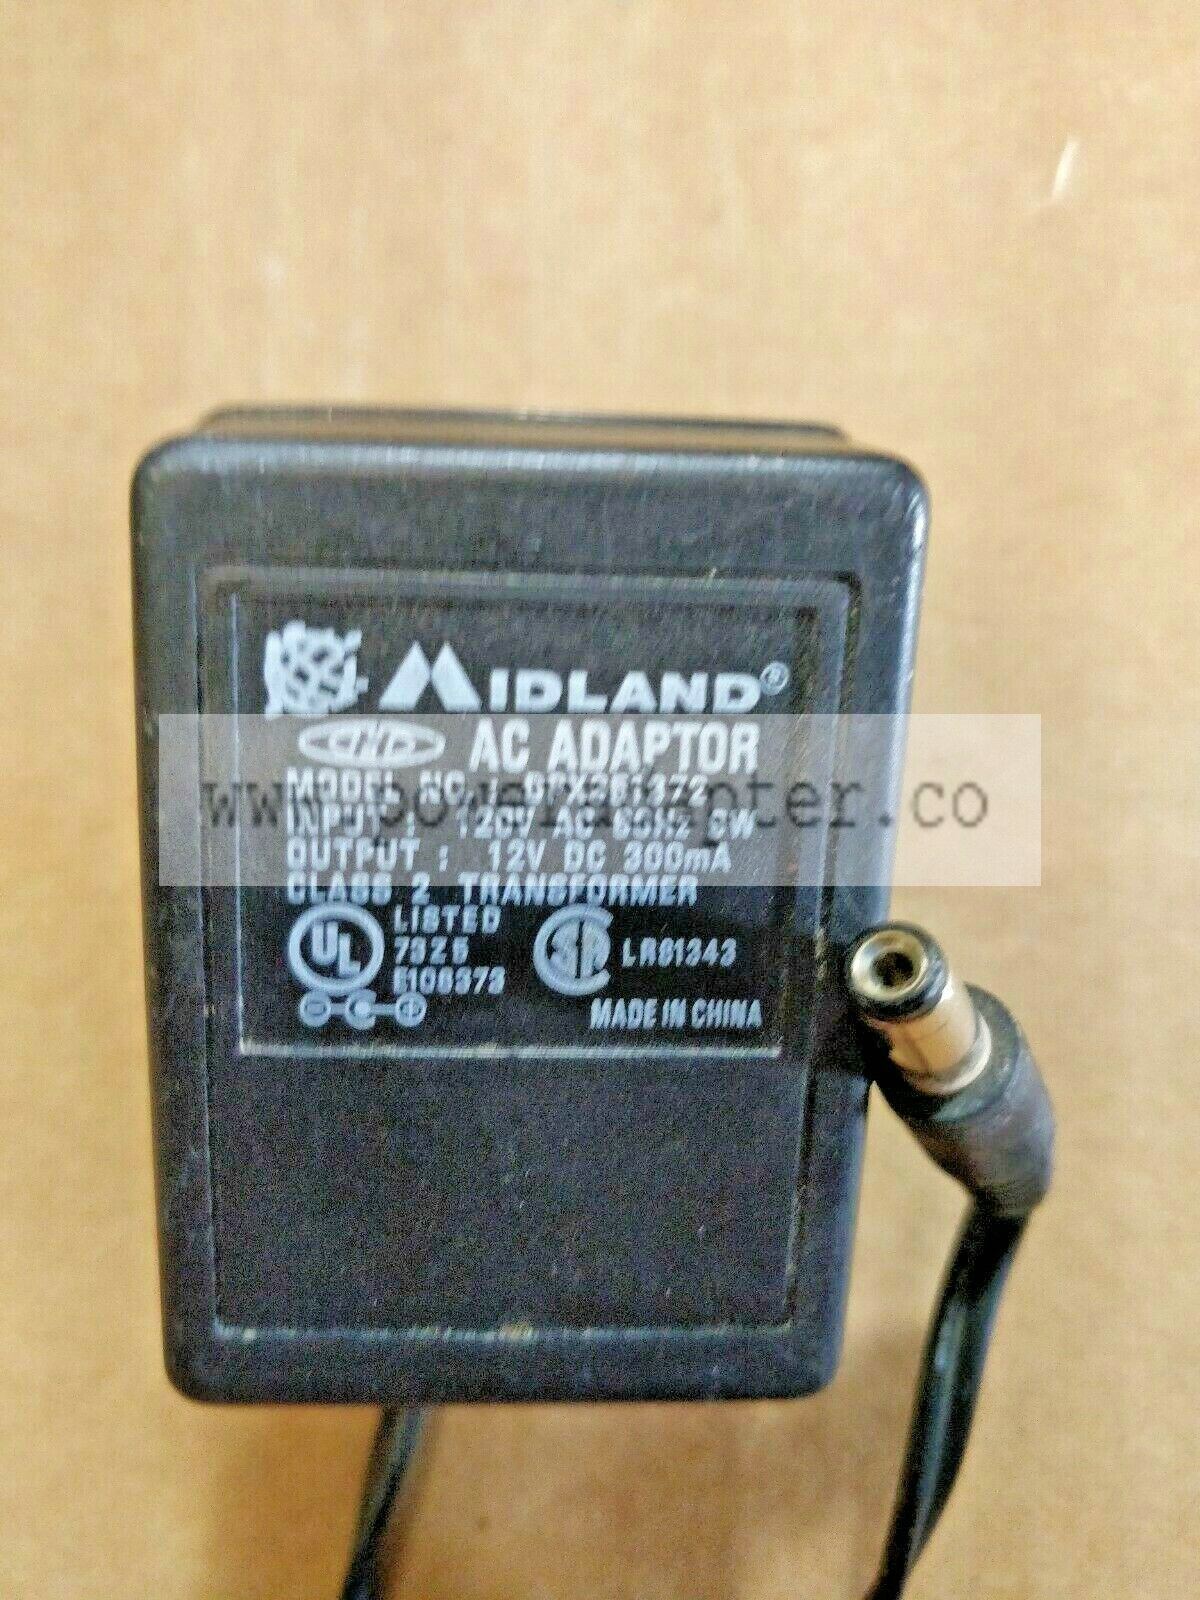 12V 300mA Midland AC Adapter - Midland DPX351372 Model: DPX351372 Output Voltage: 12 V Type: AC/AC Adapter Brand: M